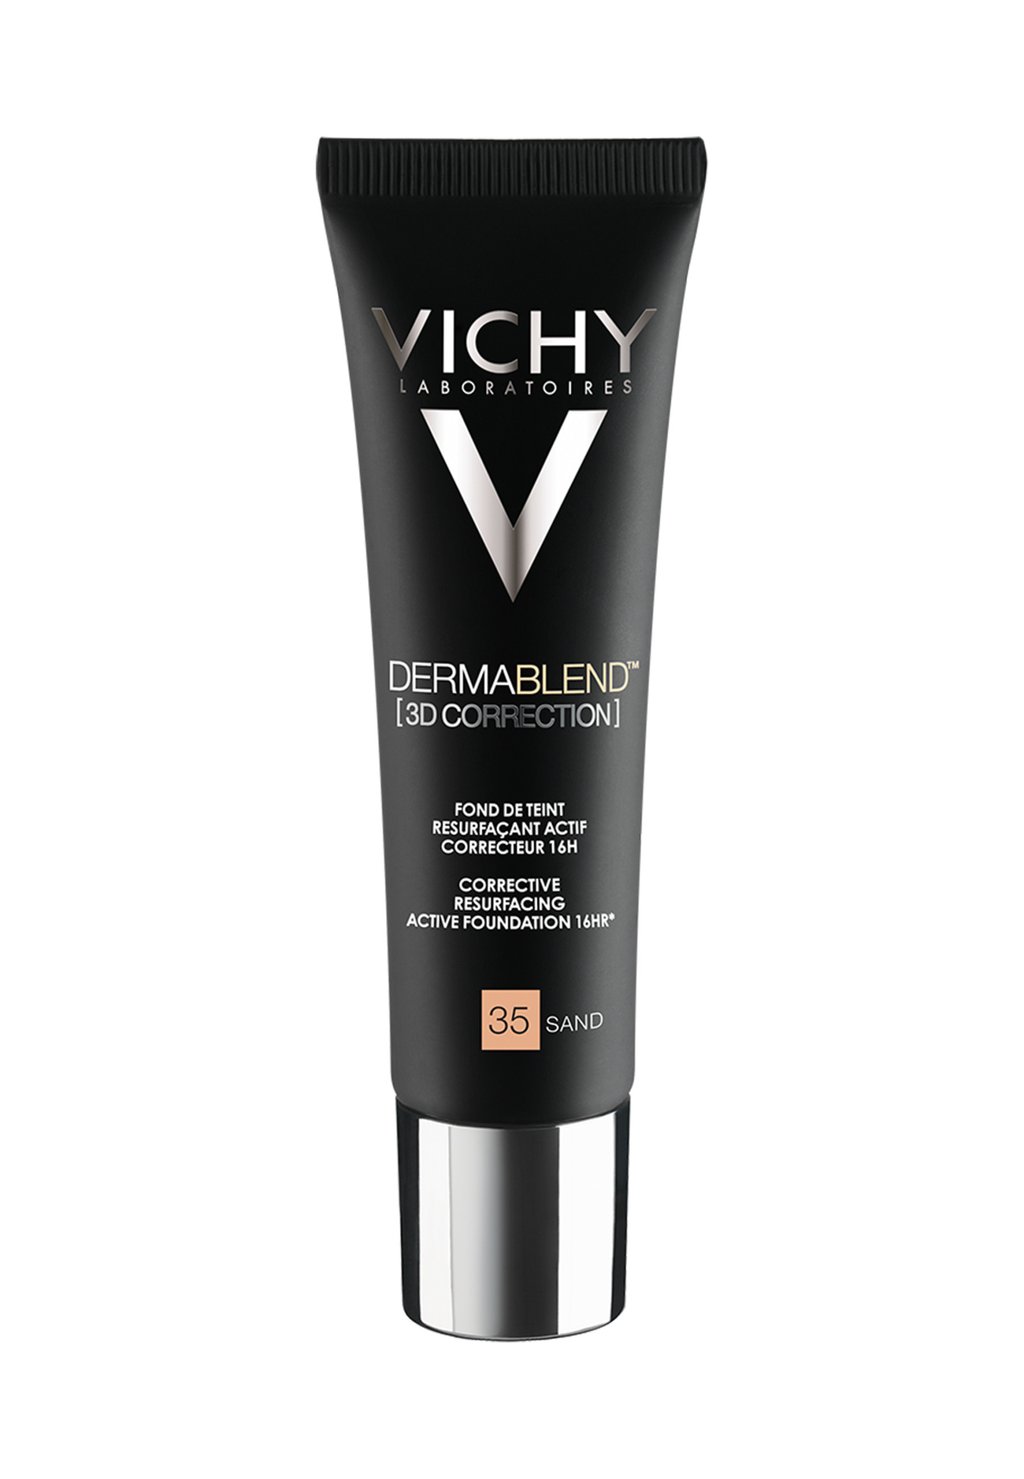 Консилер DERMABLEND [3D CORRECTION] MAKE-UP SAND 35 VICHY